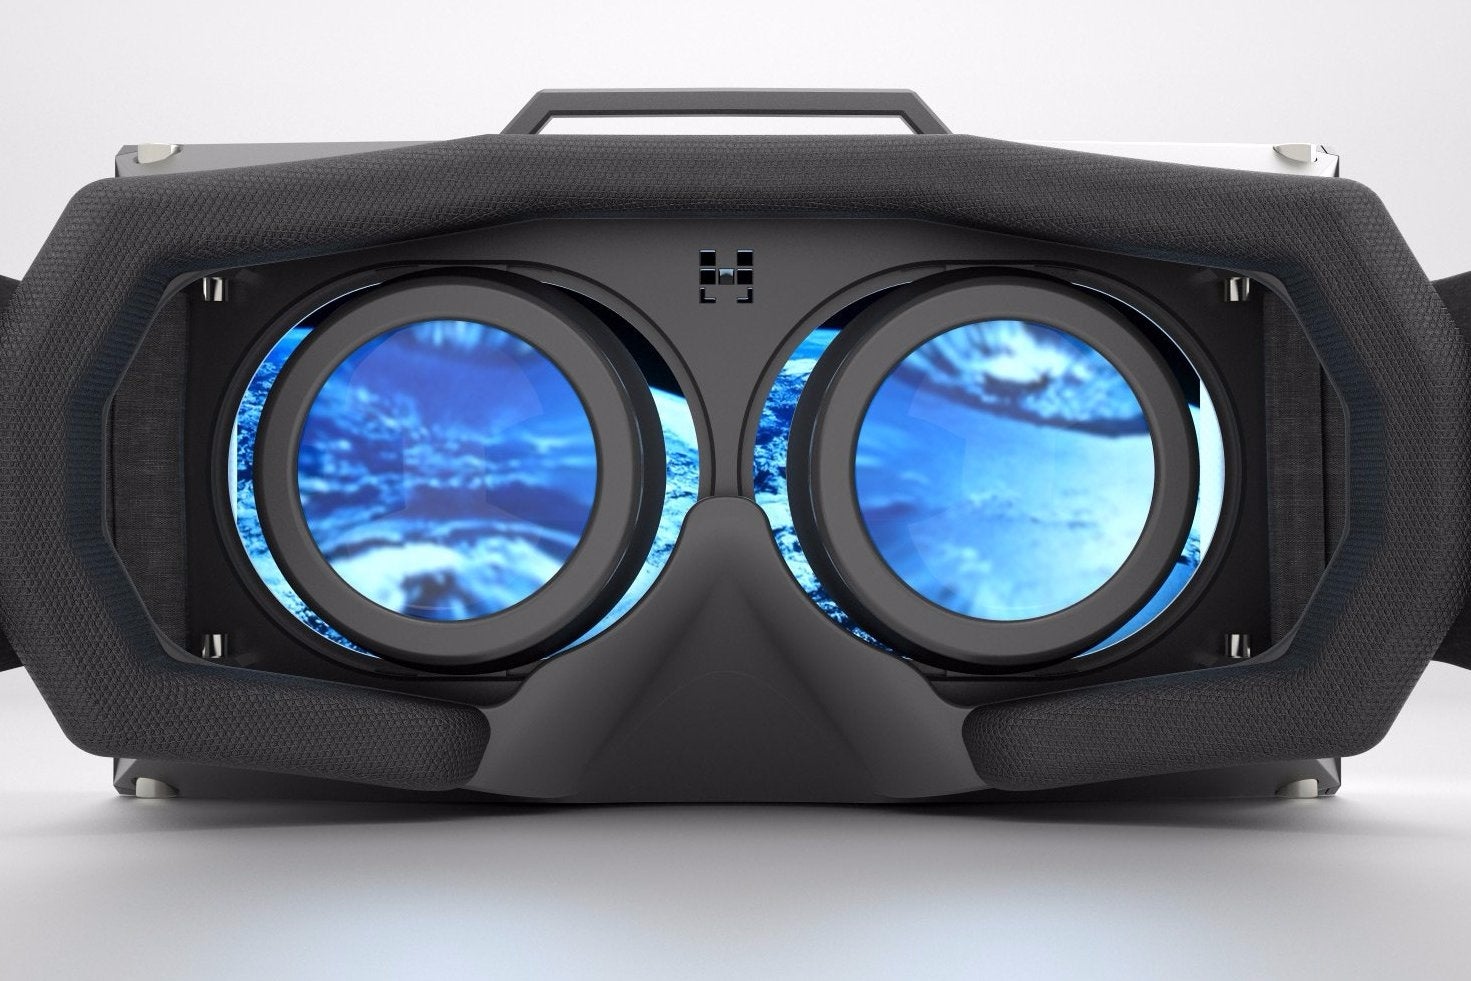 Image for Luckey: VR's iPhone moment is coming, but not yet